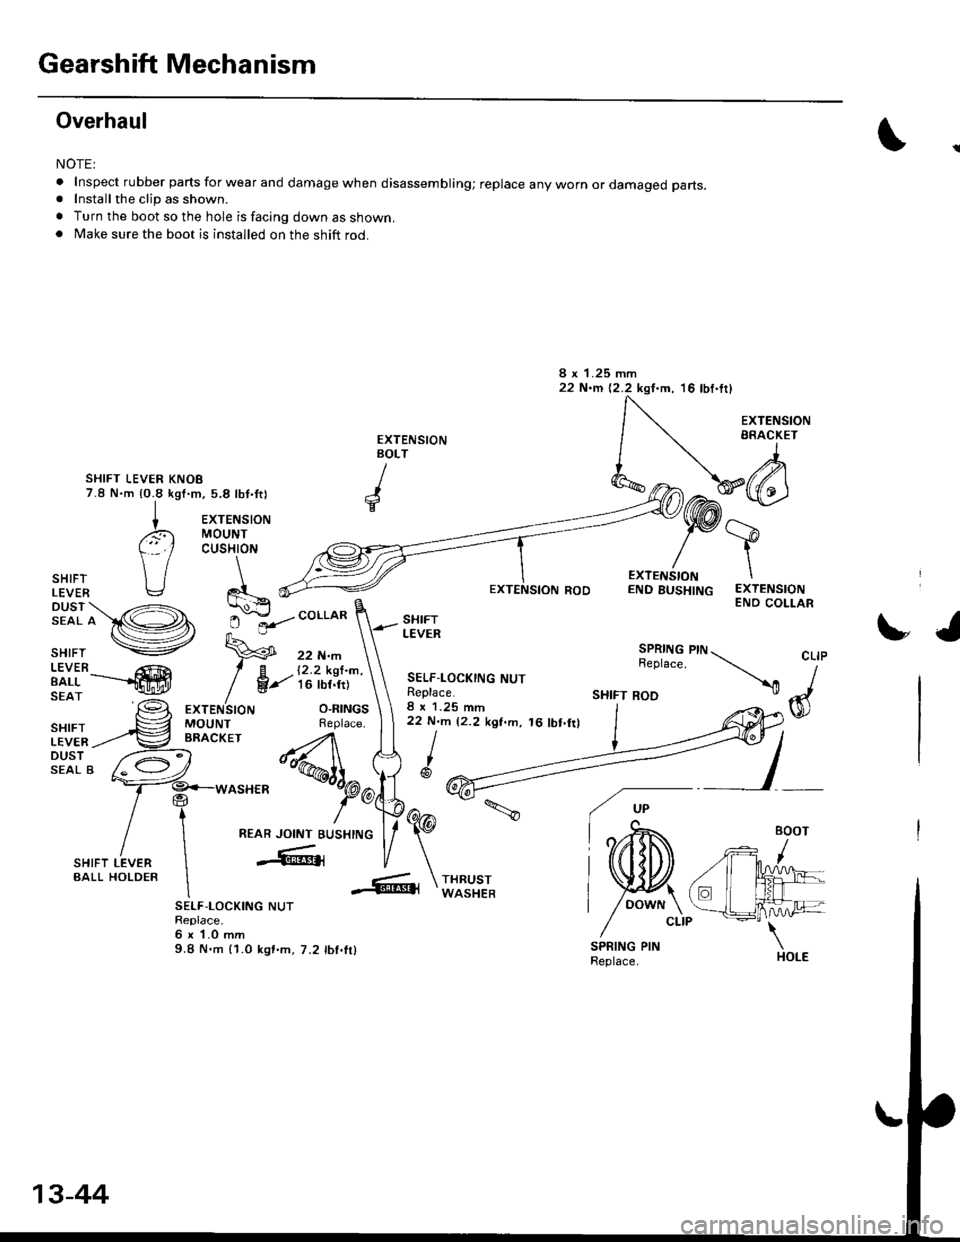 HONDA CIVIC 1997 6.G Workshop Manual Gearshift Mechanism
Overhaul
NOTE:
.Inspectrubberpartsforwearanddamagewhendisassembling;replaceanywornordamagedparts.
. Install the clip as shown.
. Turn the boot so the hole is facing down as shown..